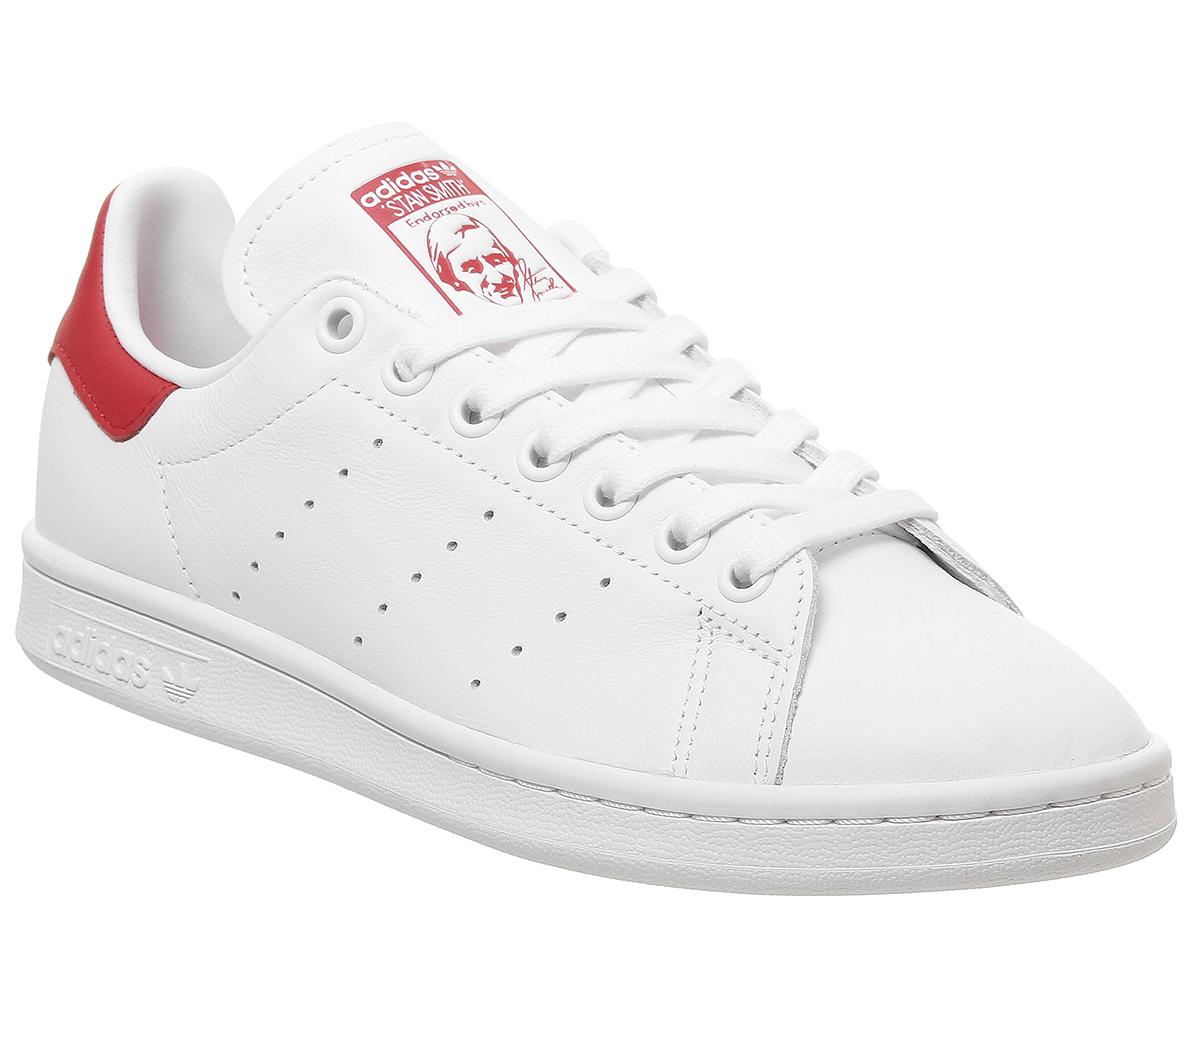 adidas Stan Smith Trainers White Lush Red - Hers trainers